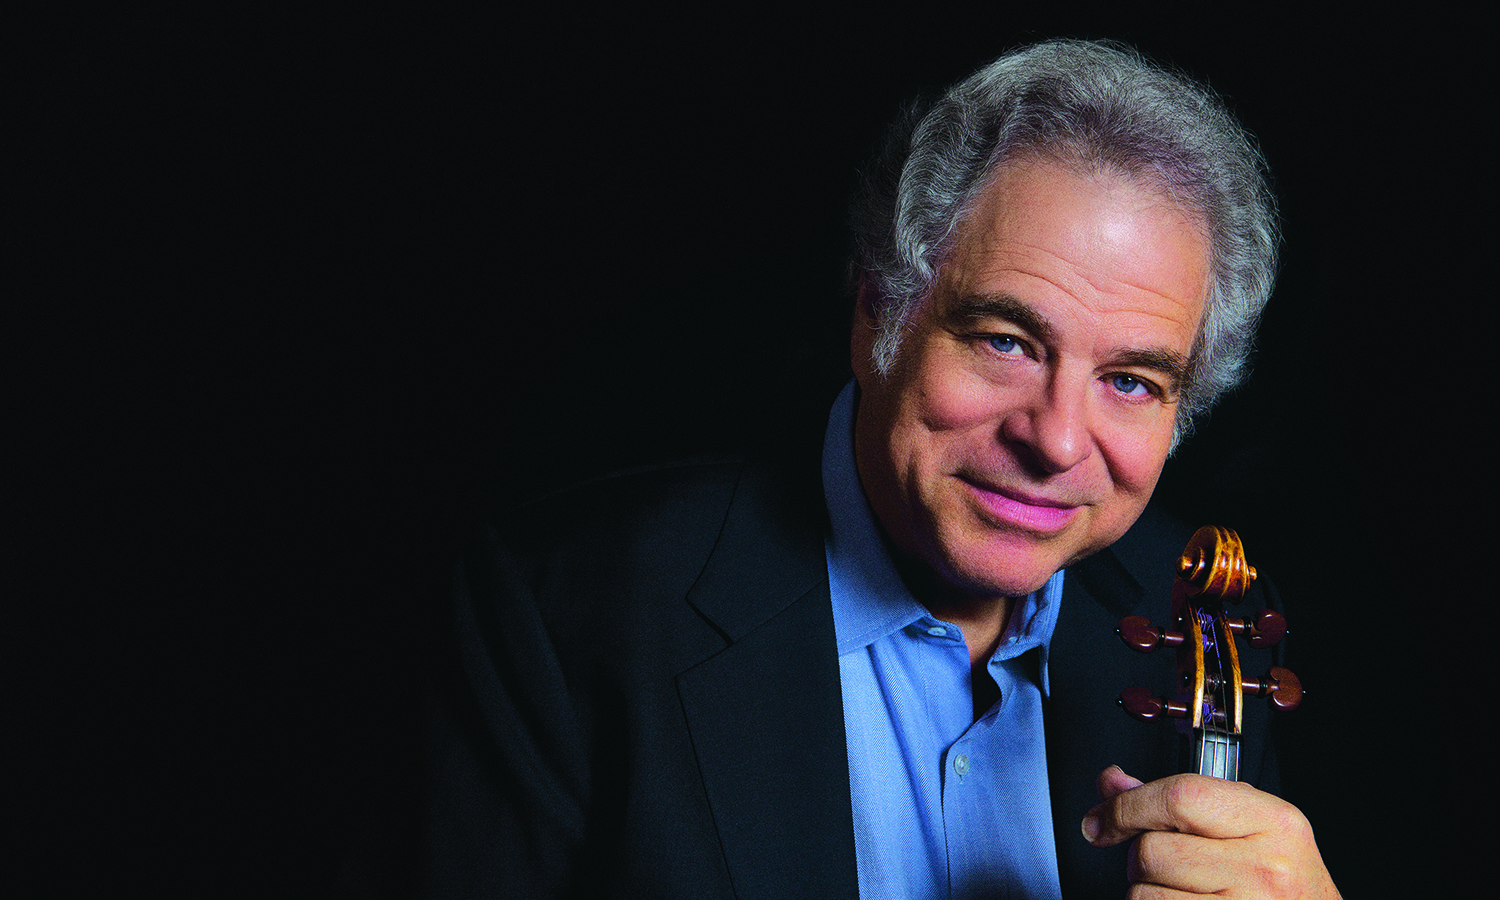 The great Itzhak Perlman is coming to Sarasota for just one night. (Courtesy photo)